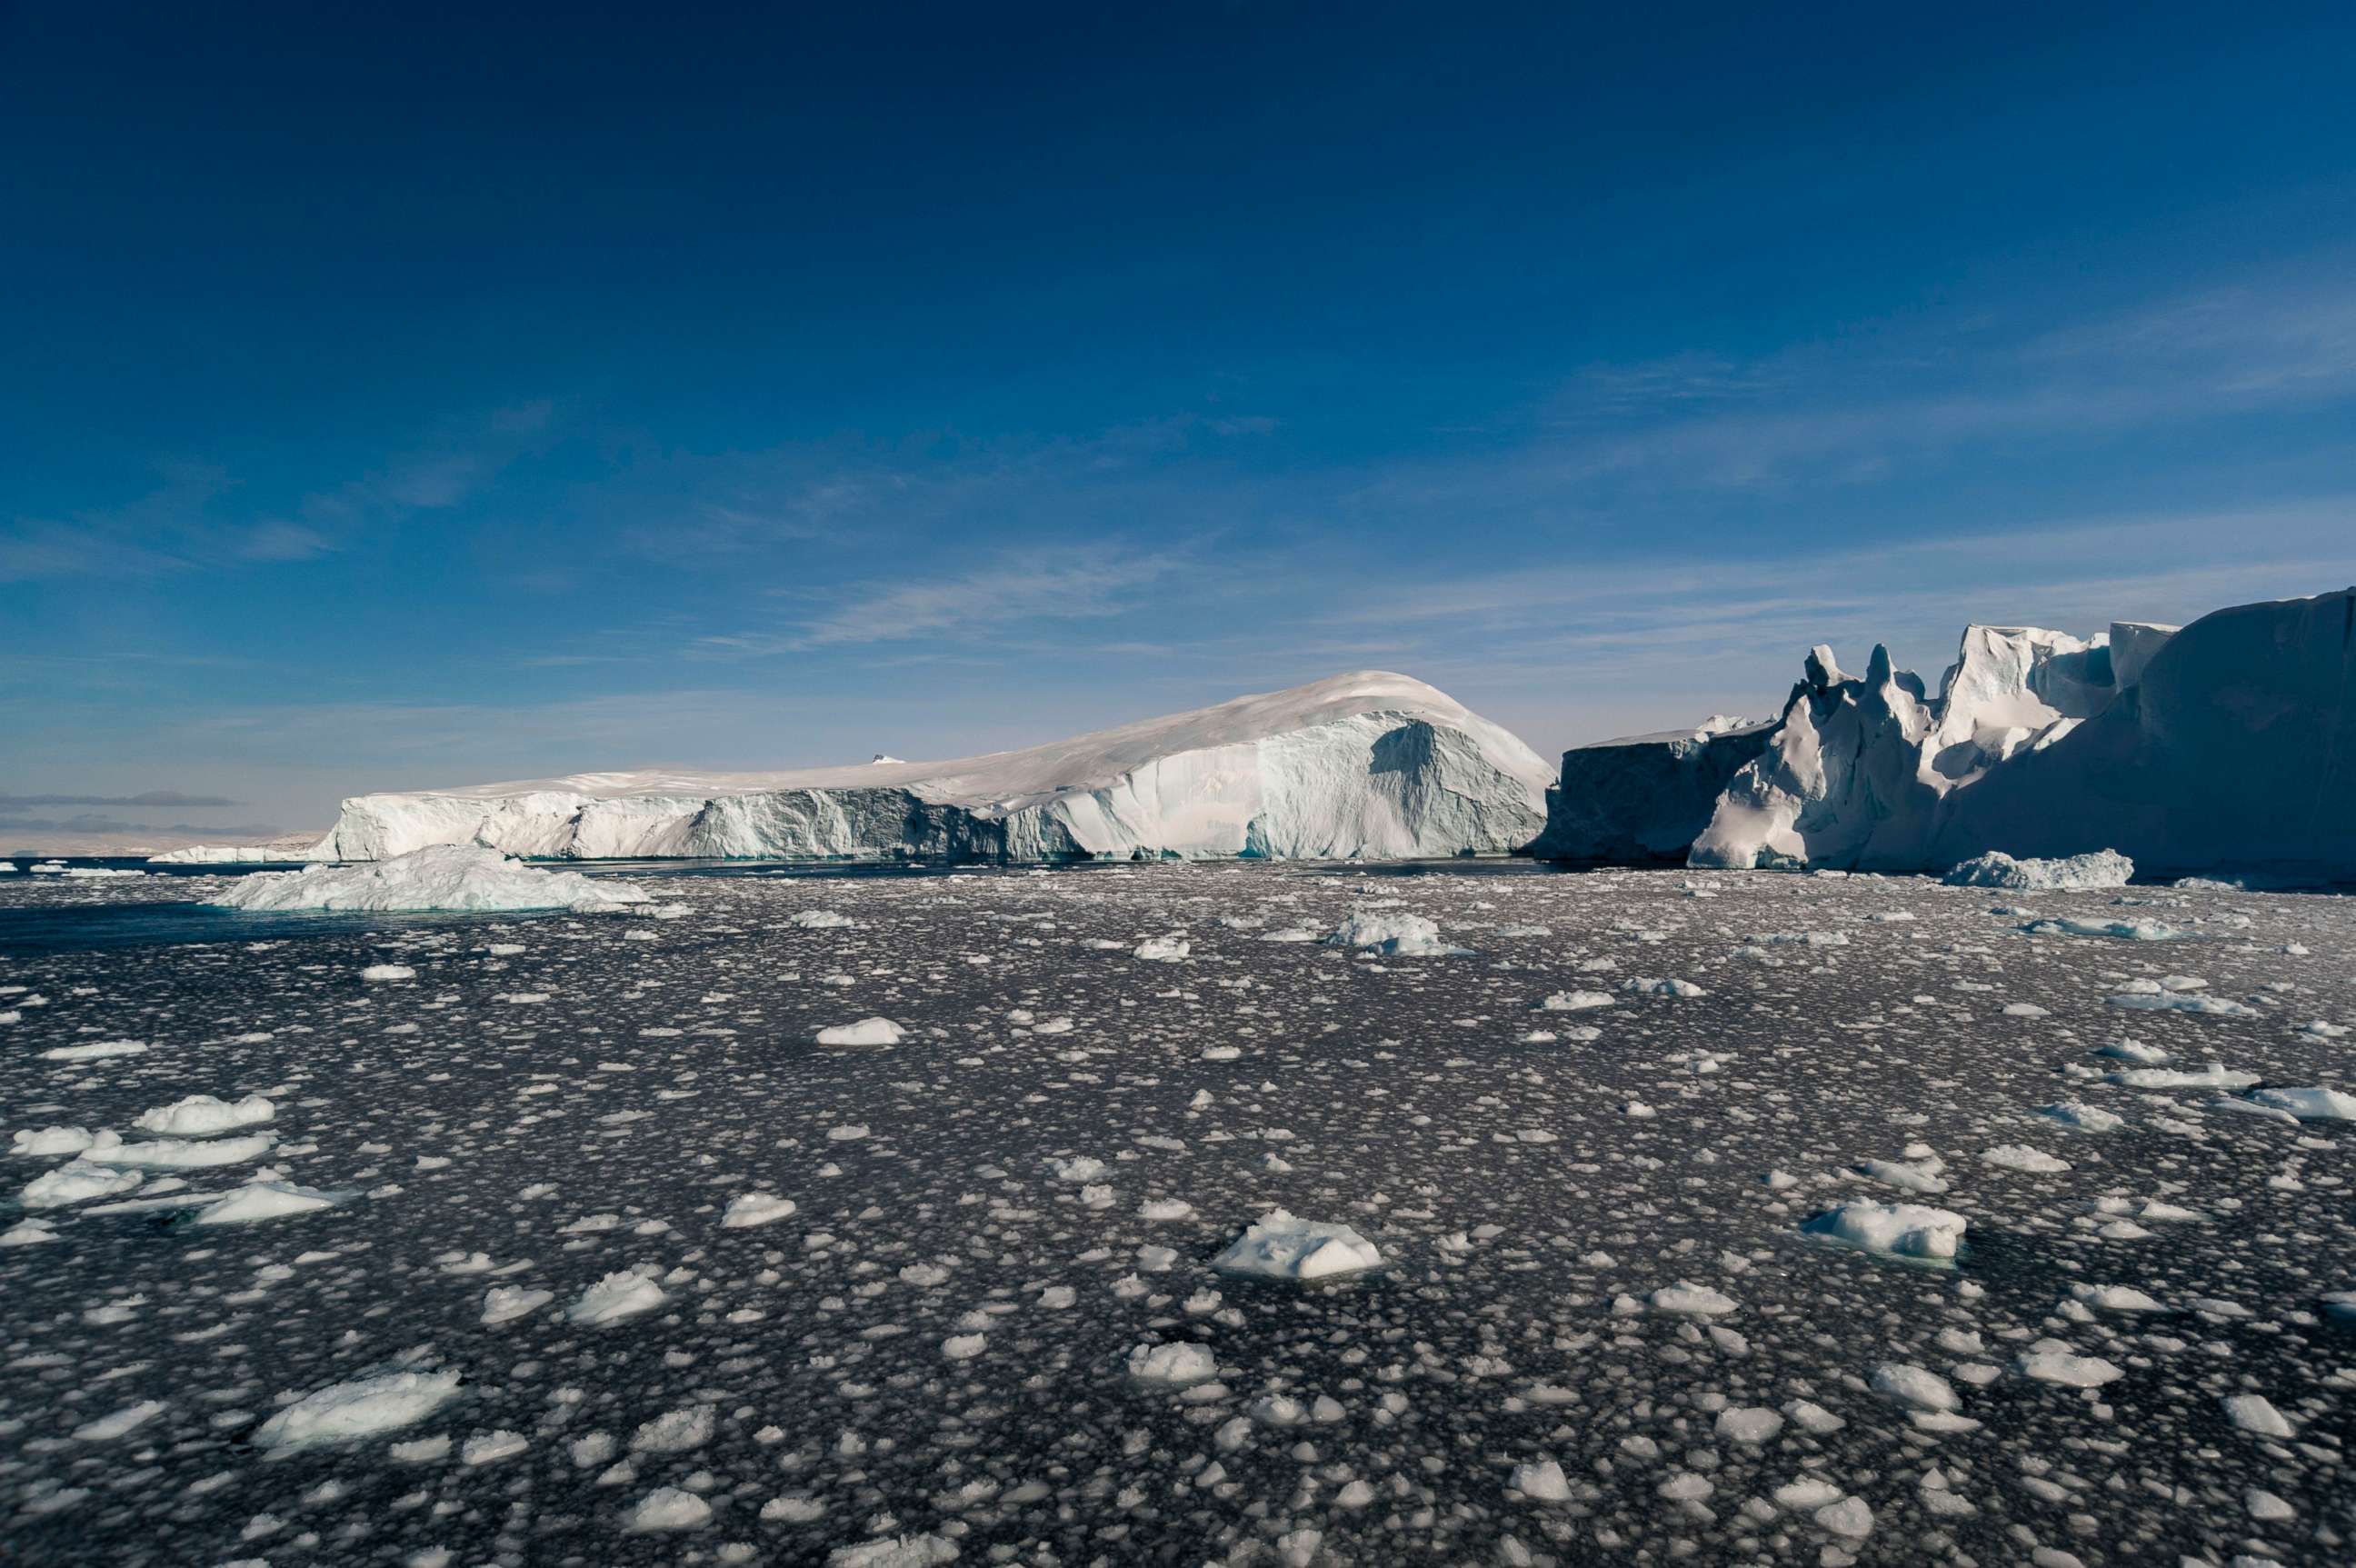 PHOTO: A view of icebergs and melting pack ice in Ilulissat icefjord, an UNESCO World Heritage Site, in Ilulissat, Greenland.